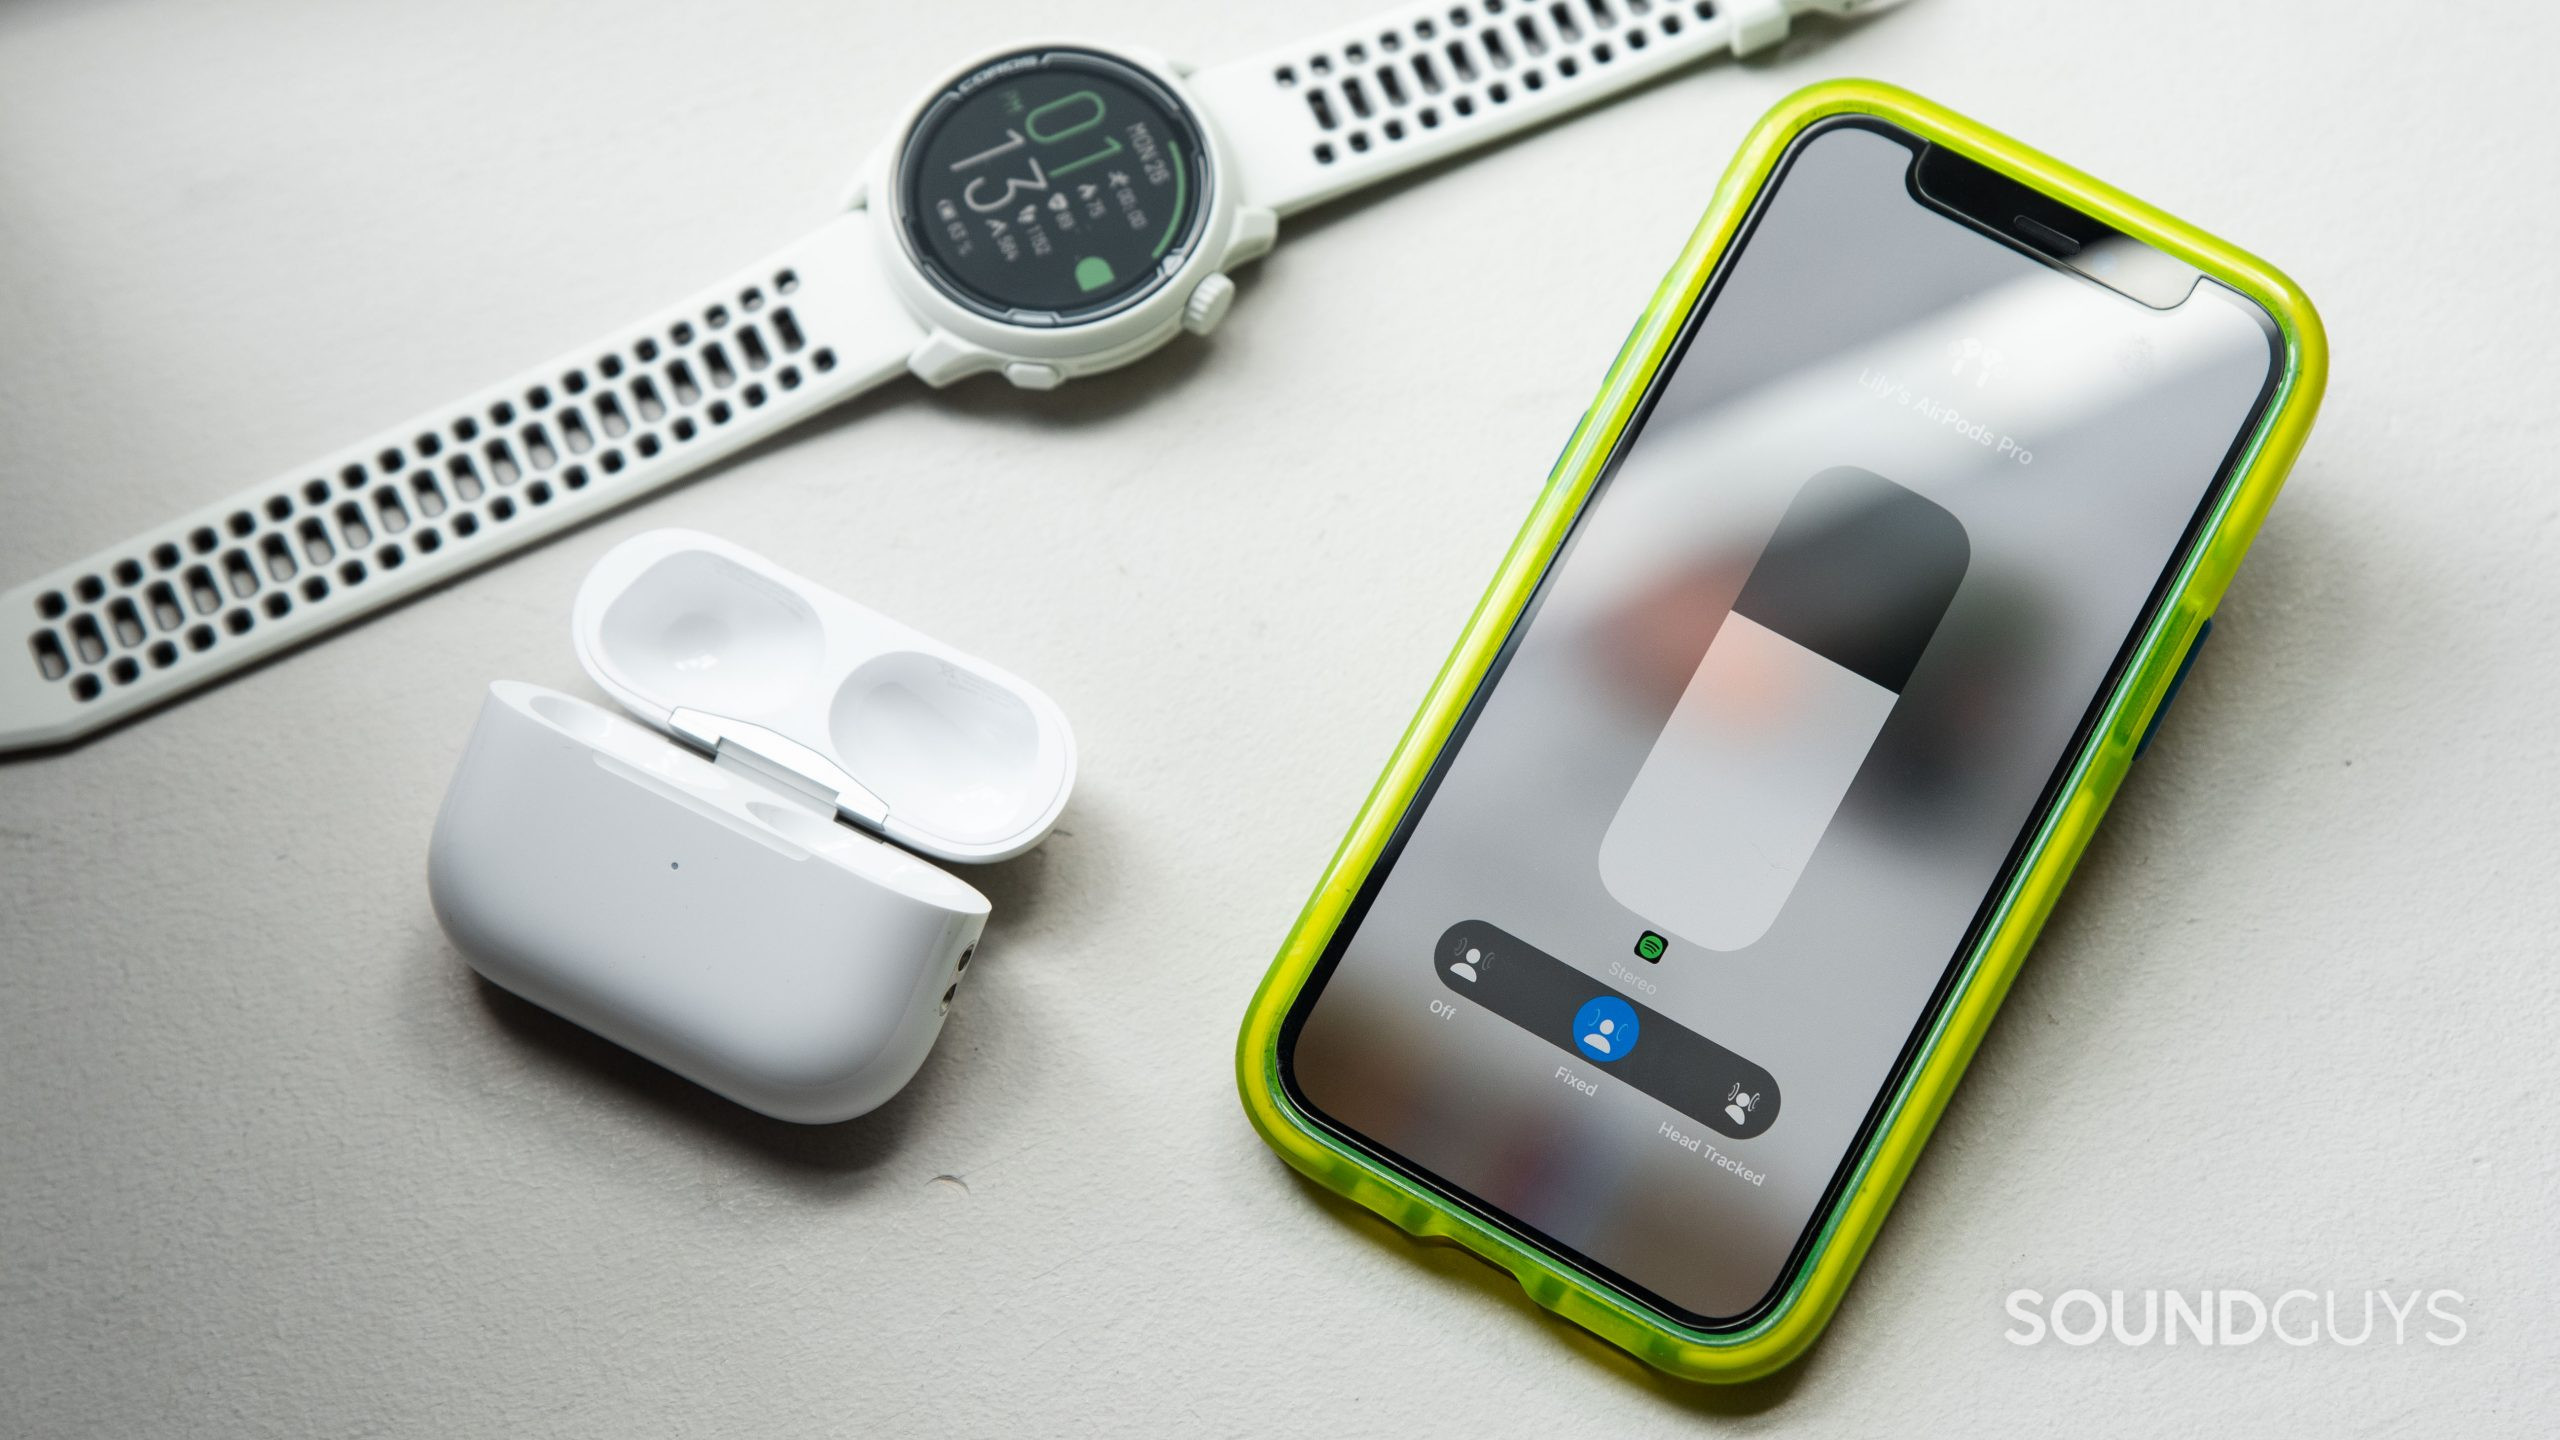 An iPhone 12 mini displays the AirPods Pro (2nd generation) spatial audio modes with the case and a smart watch next to it.